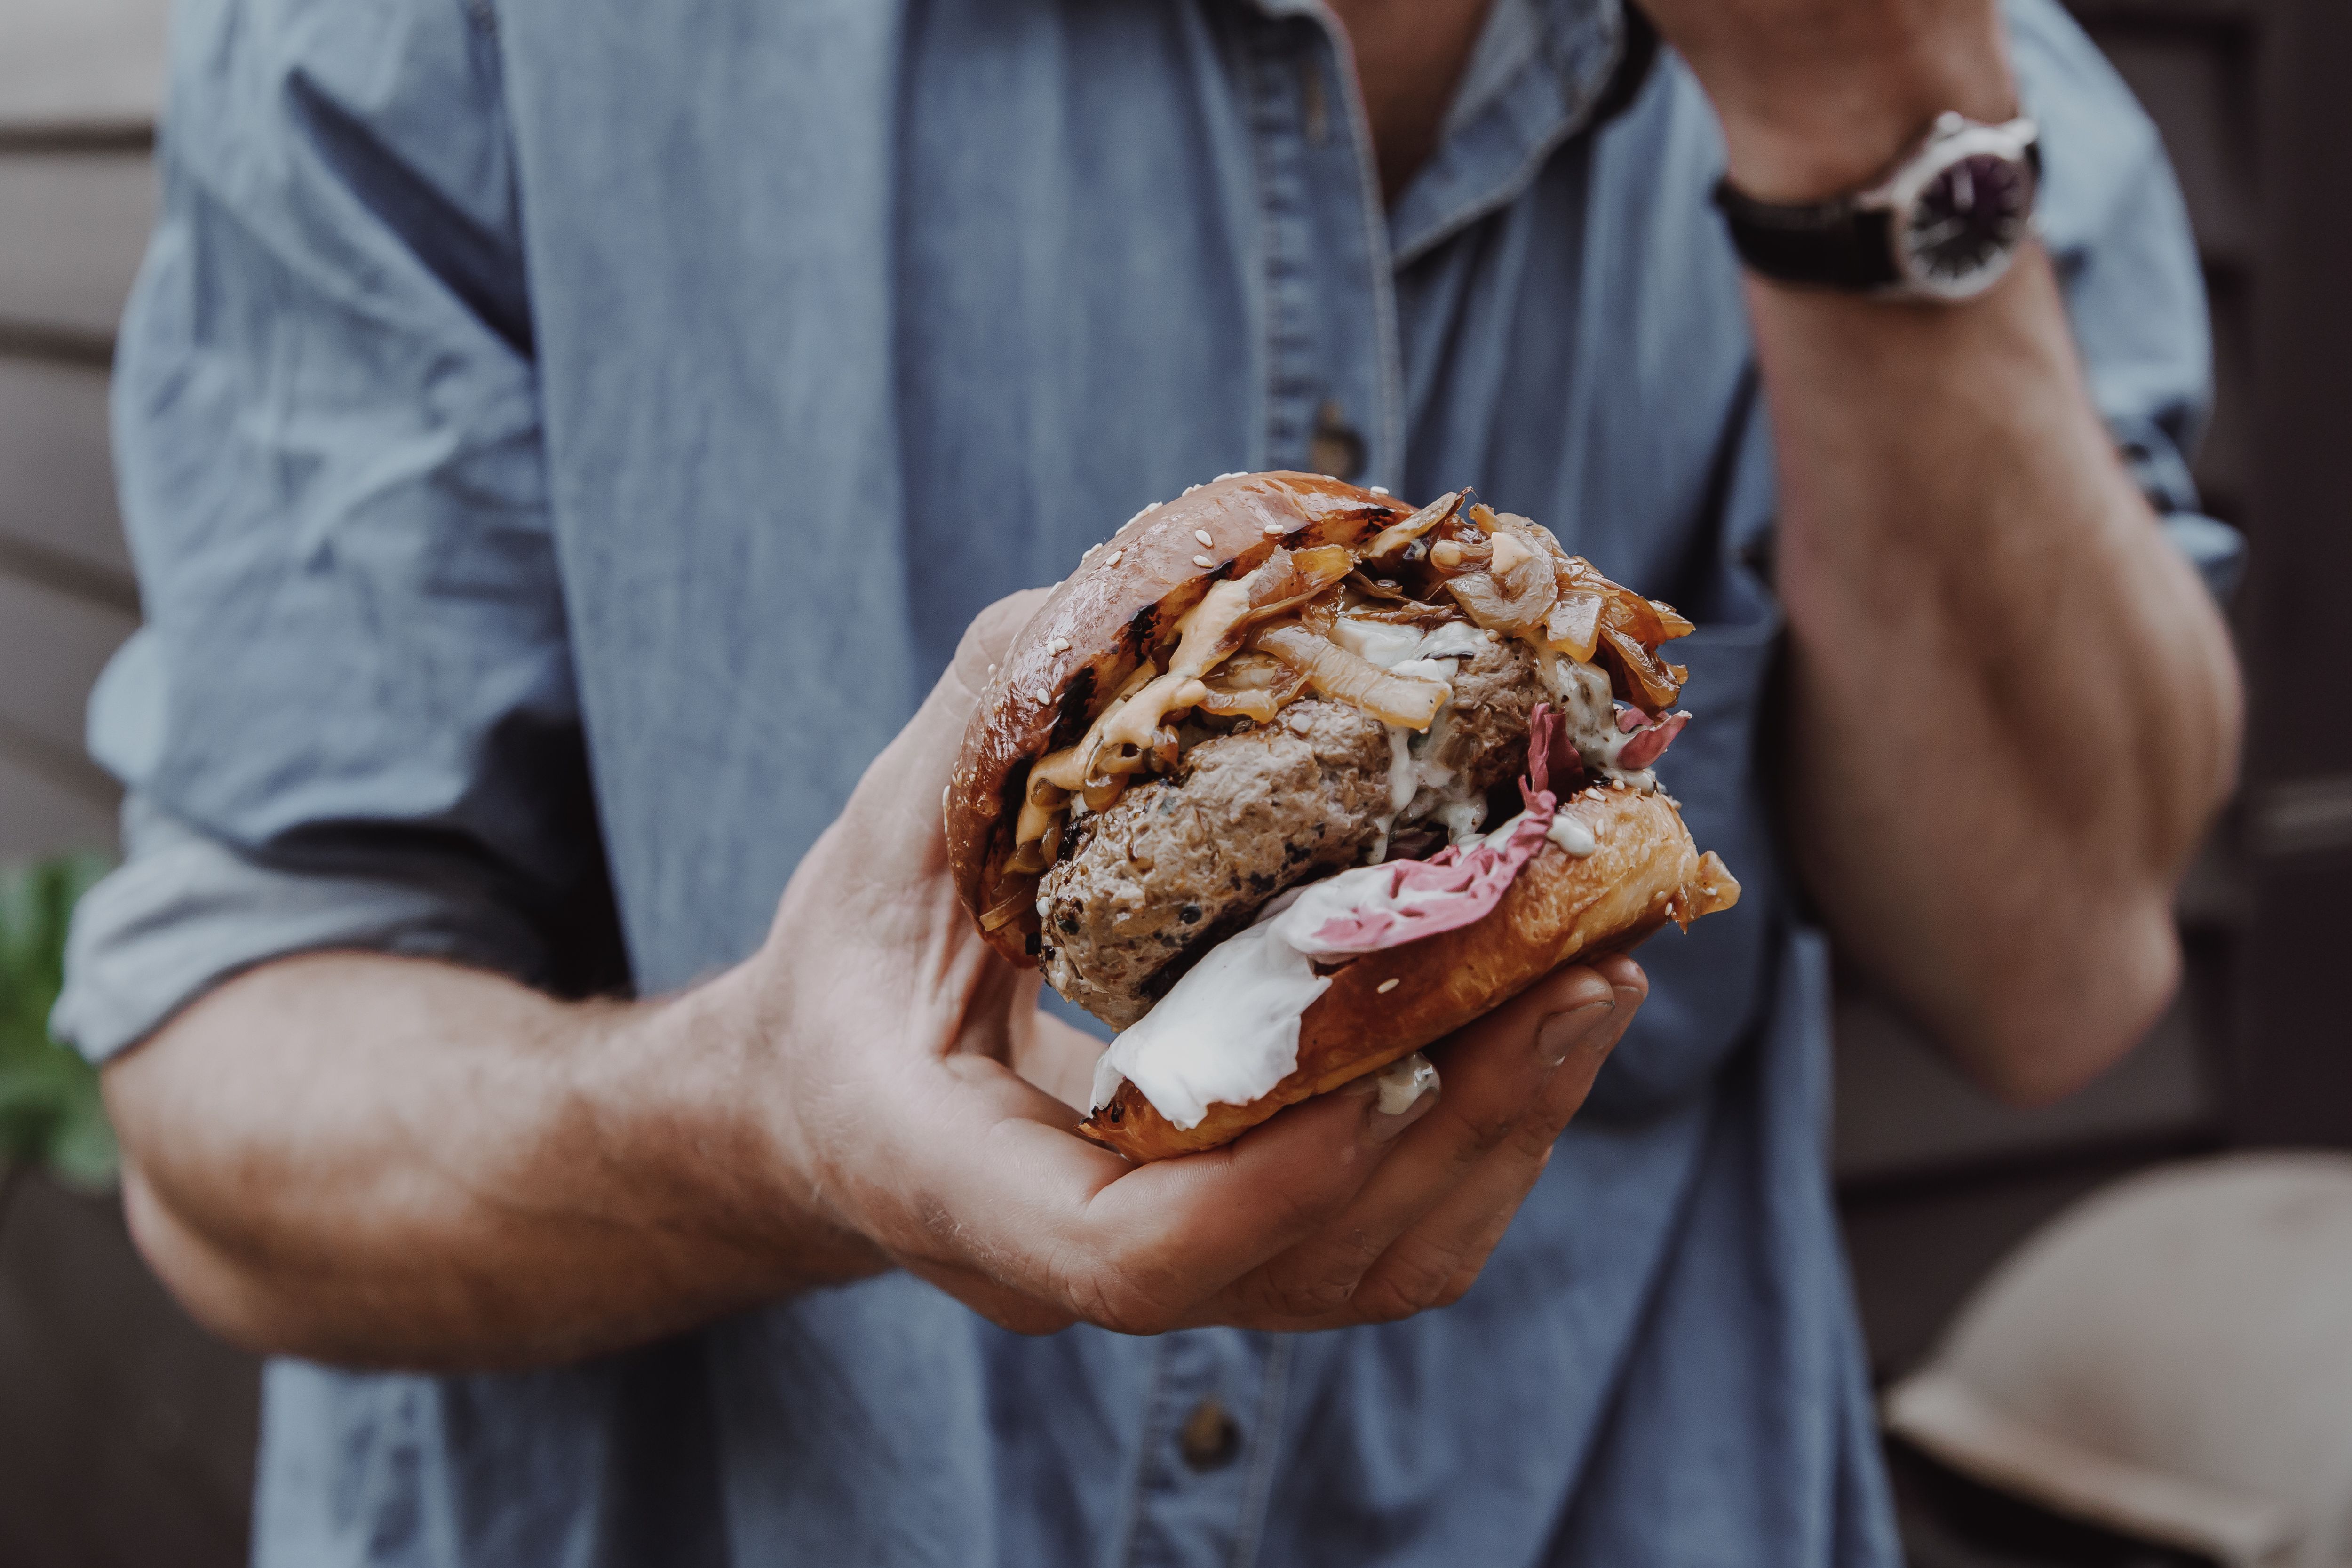 Hands holding wild venison burger with radicchio and blue cheese